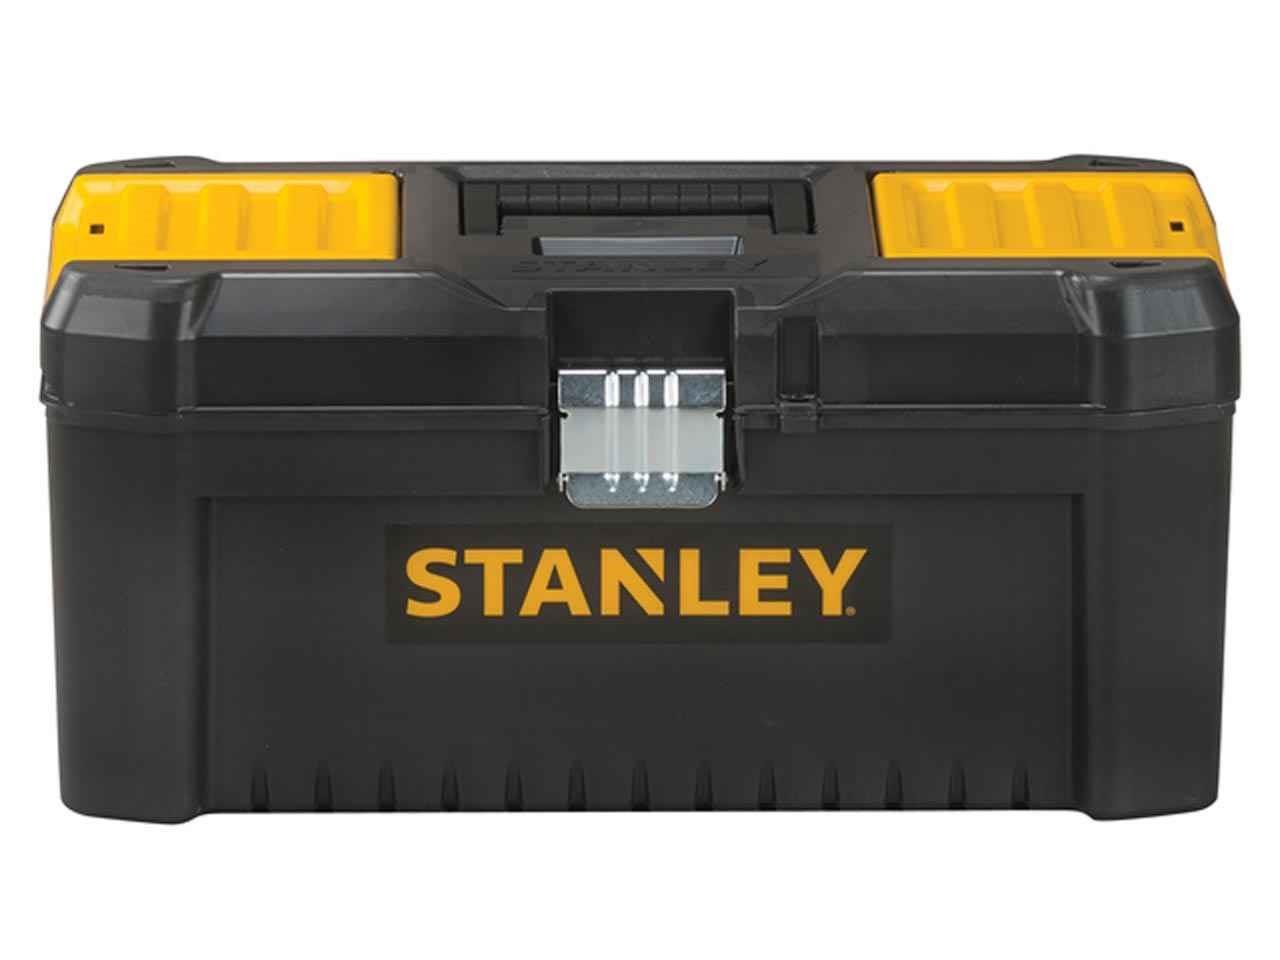 Chest tool STANLEY STST1-75518